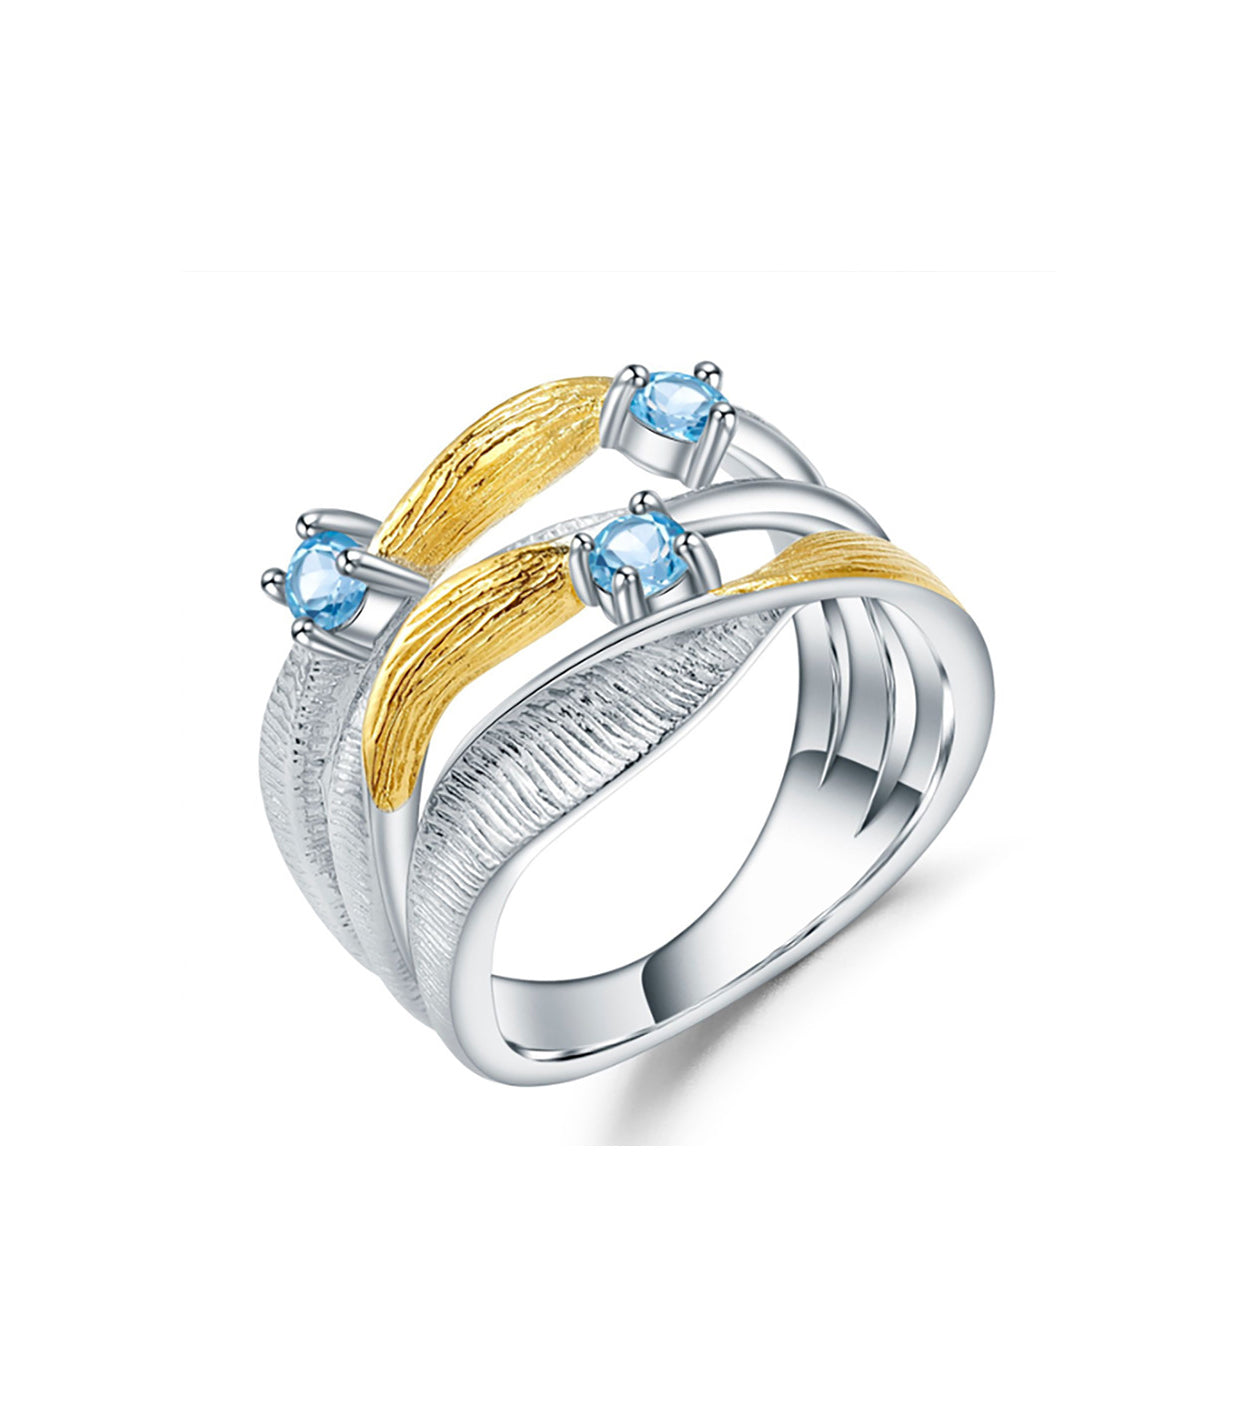 A mixed metal gold vermeil and sterling silver ring with 3 bands. The ring also features 3 Swiss topaz stones.